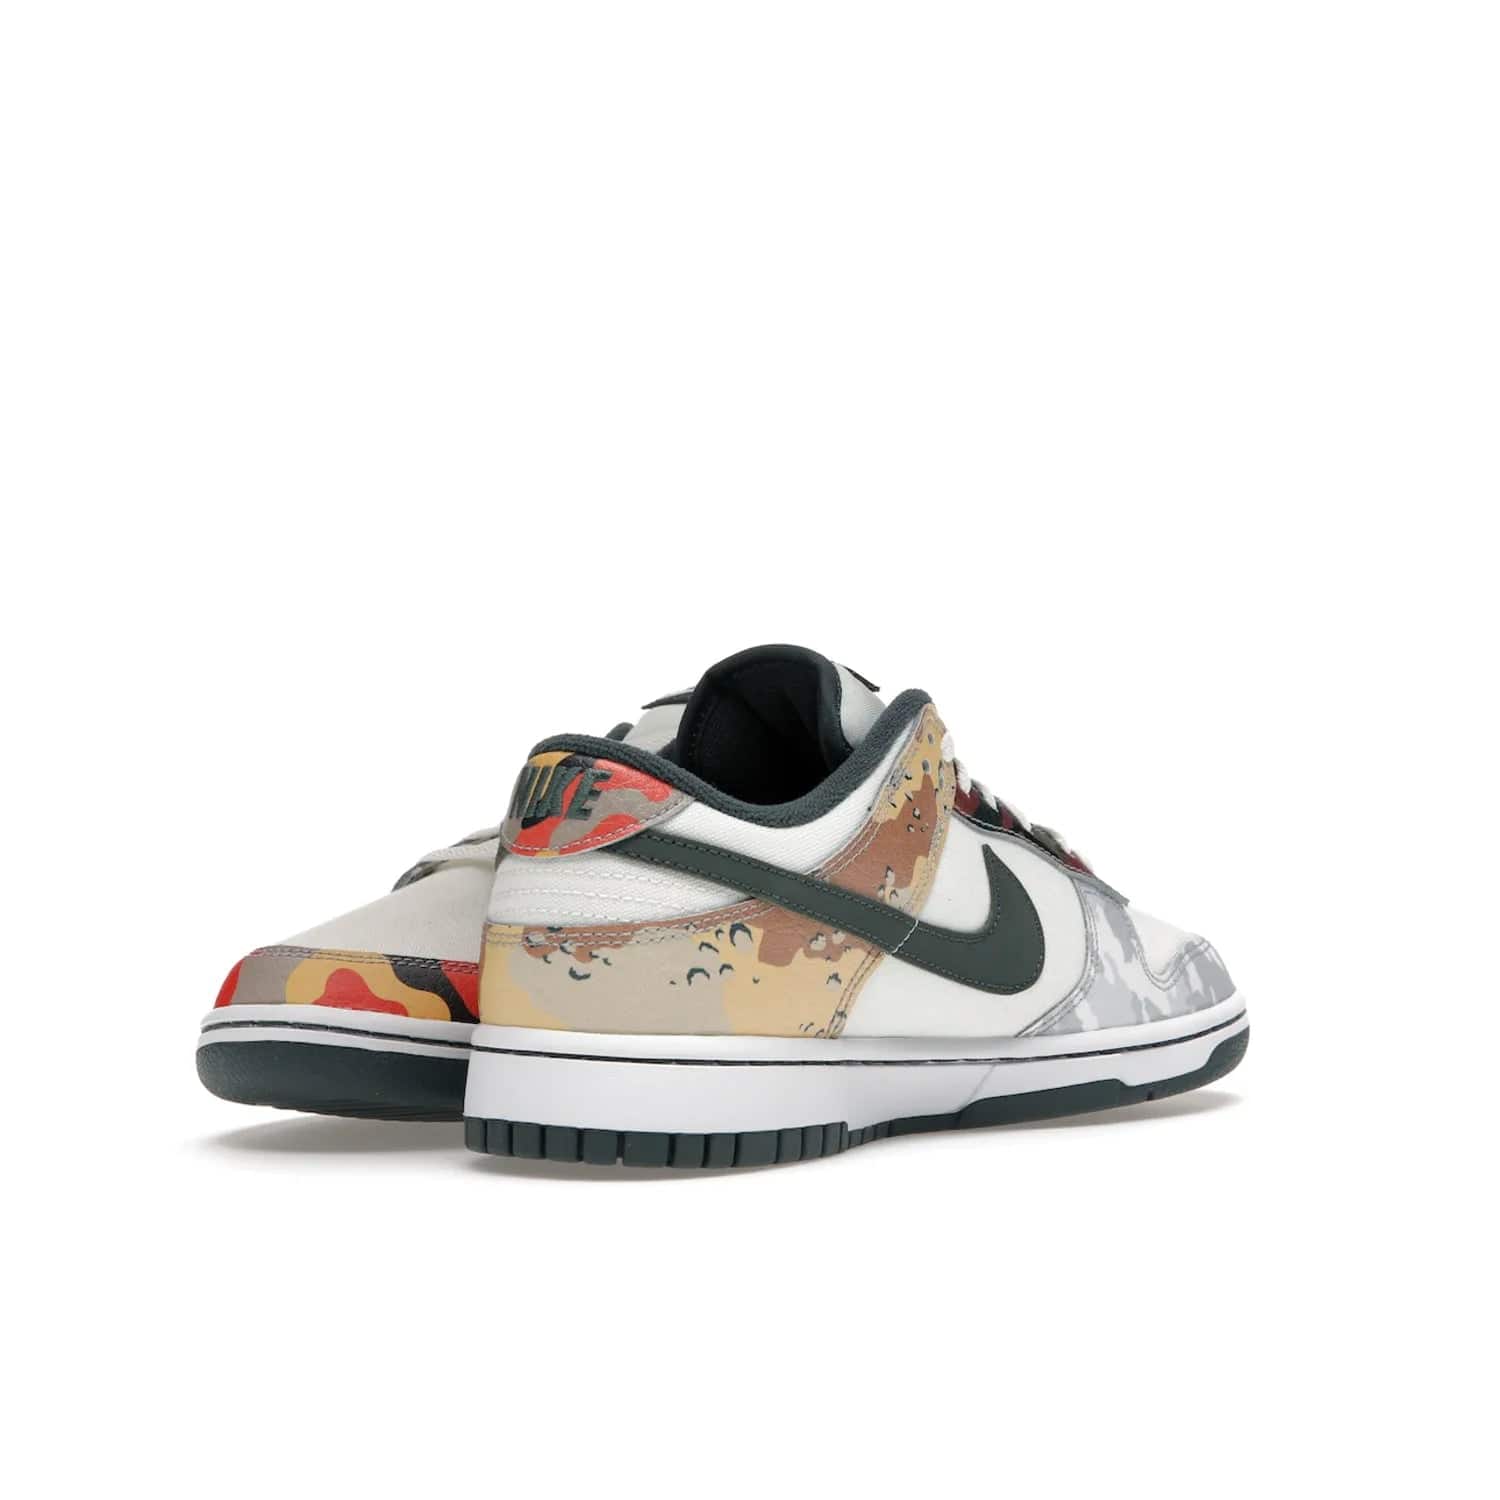 Nike Dunk Low SE Sail Multi-Camo - Image 14 - Only at www.BallersClubKickz.com - Classic design meets statement style in the Nike Dunk Low SE Sail Multi-Camo. White leather base with multi-color camo overlays, vibrant Nike Swooshes, and orange Nike embroidery. Get yours August 2021.